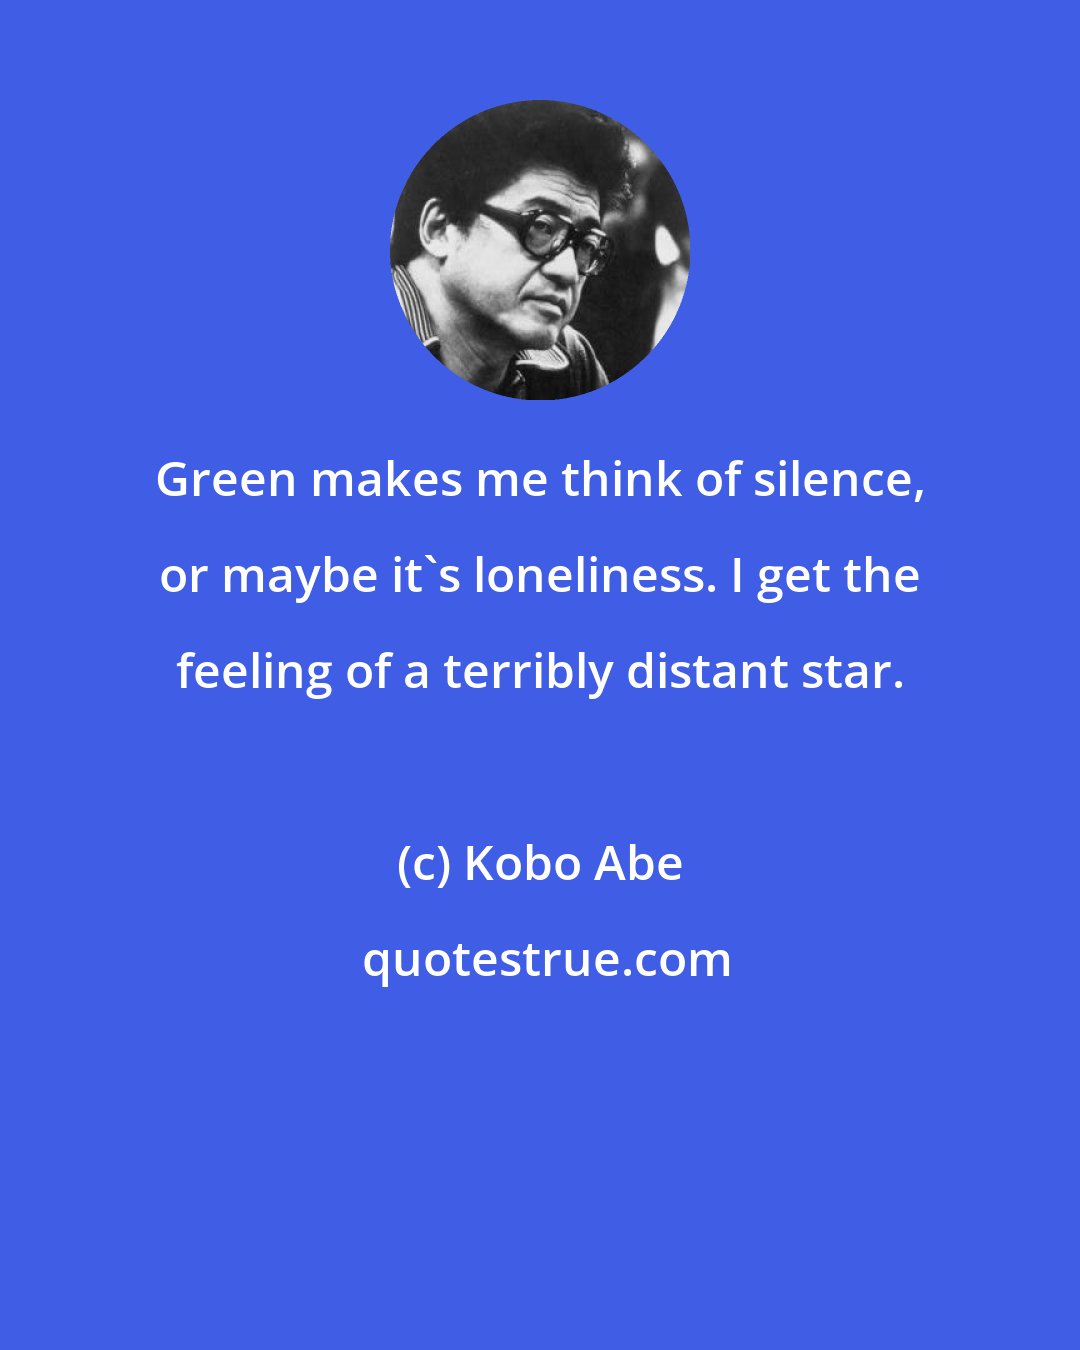 Kobo Abe: Green makes me think of silence, or maybe it's loneliness. I get the feeling of a terribly distant star.